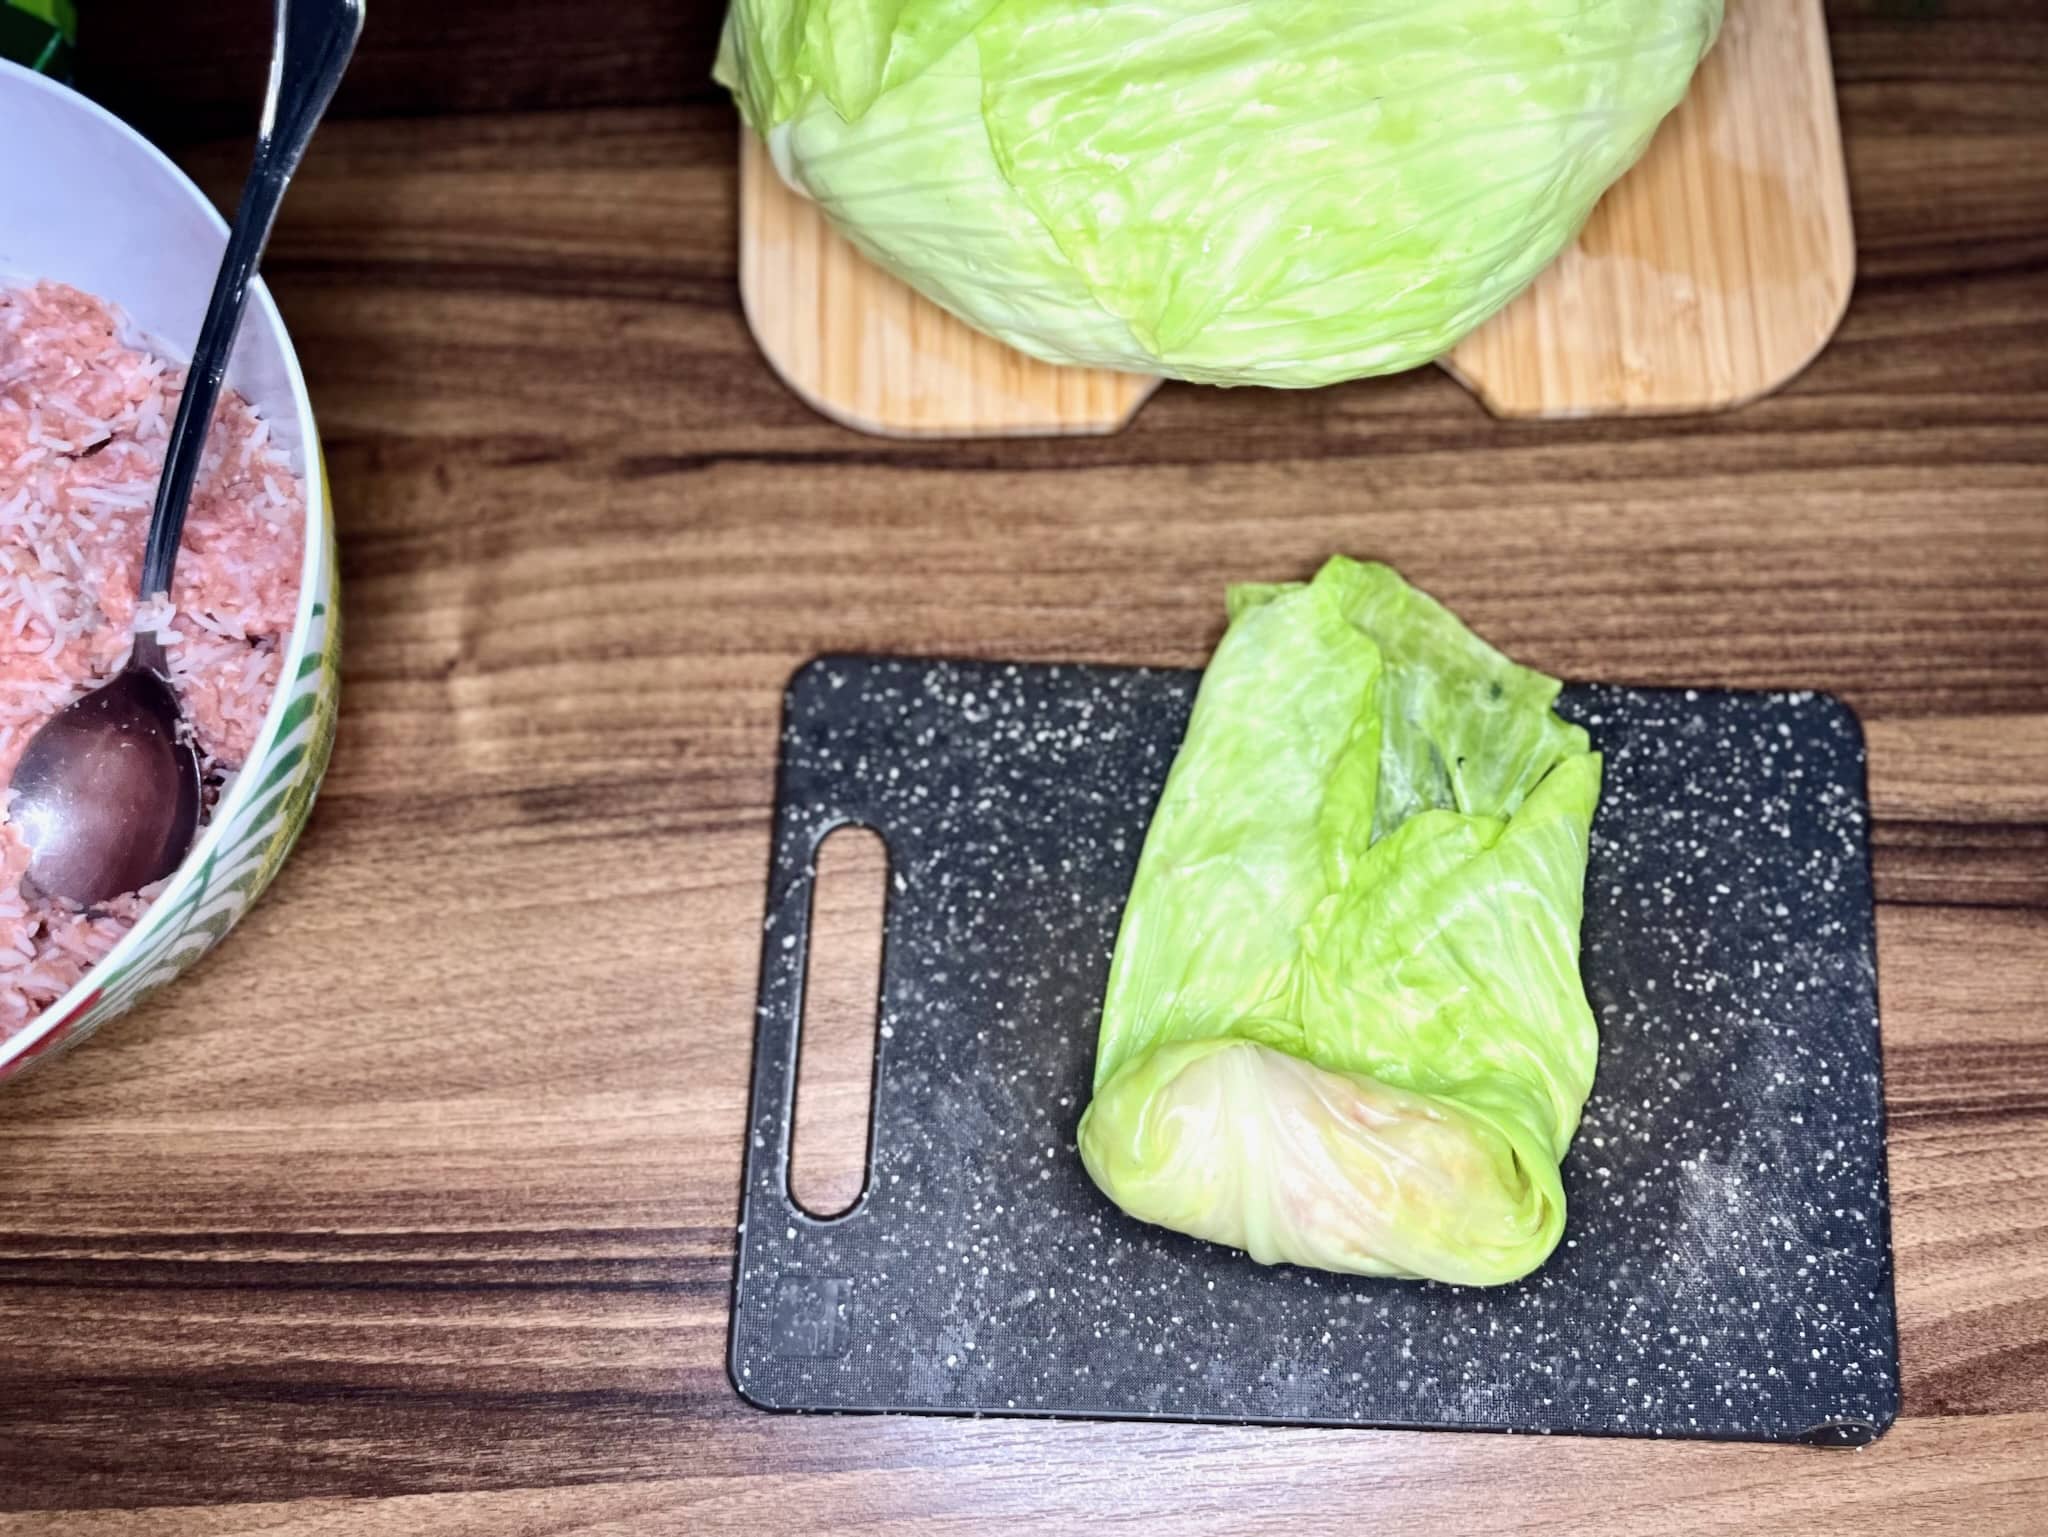 Wrapping cabbage around meat to make Stuffed Cabbage Rolls